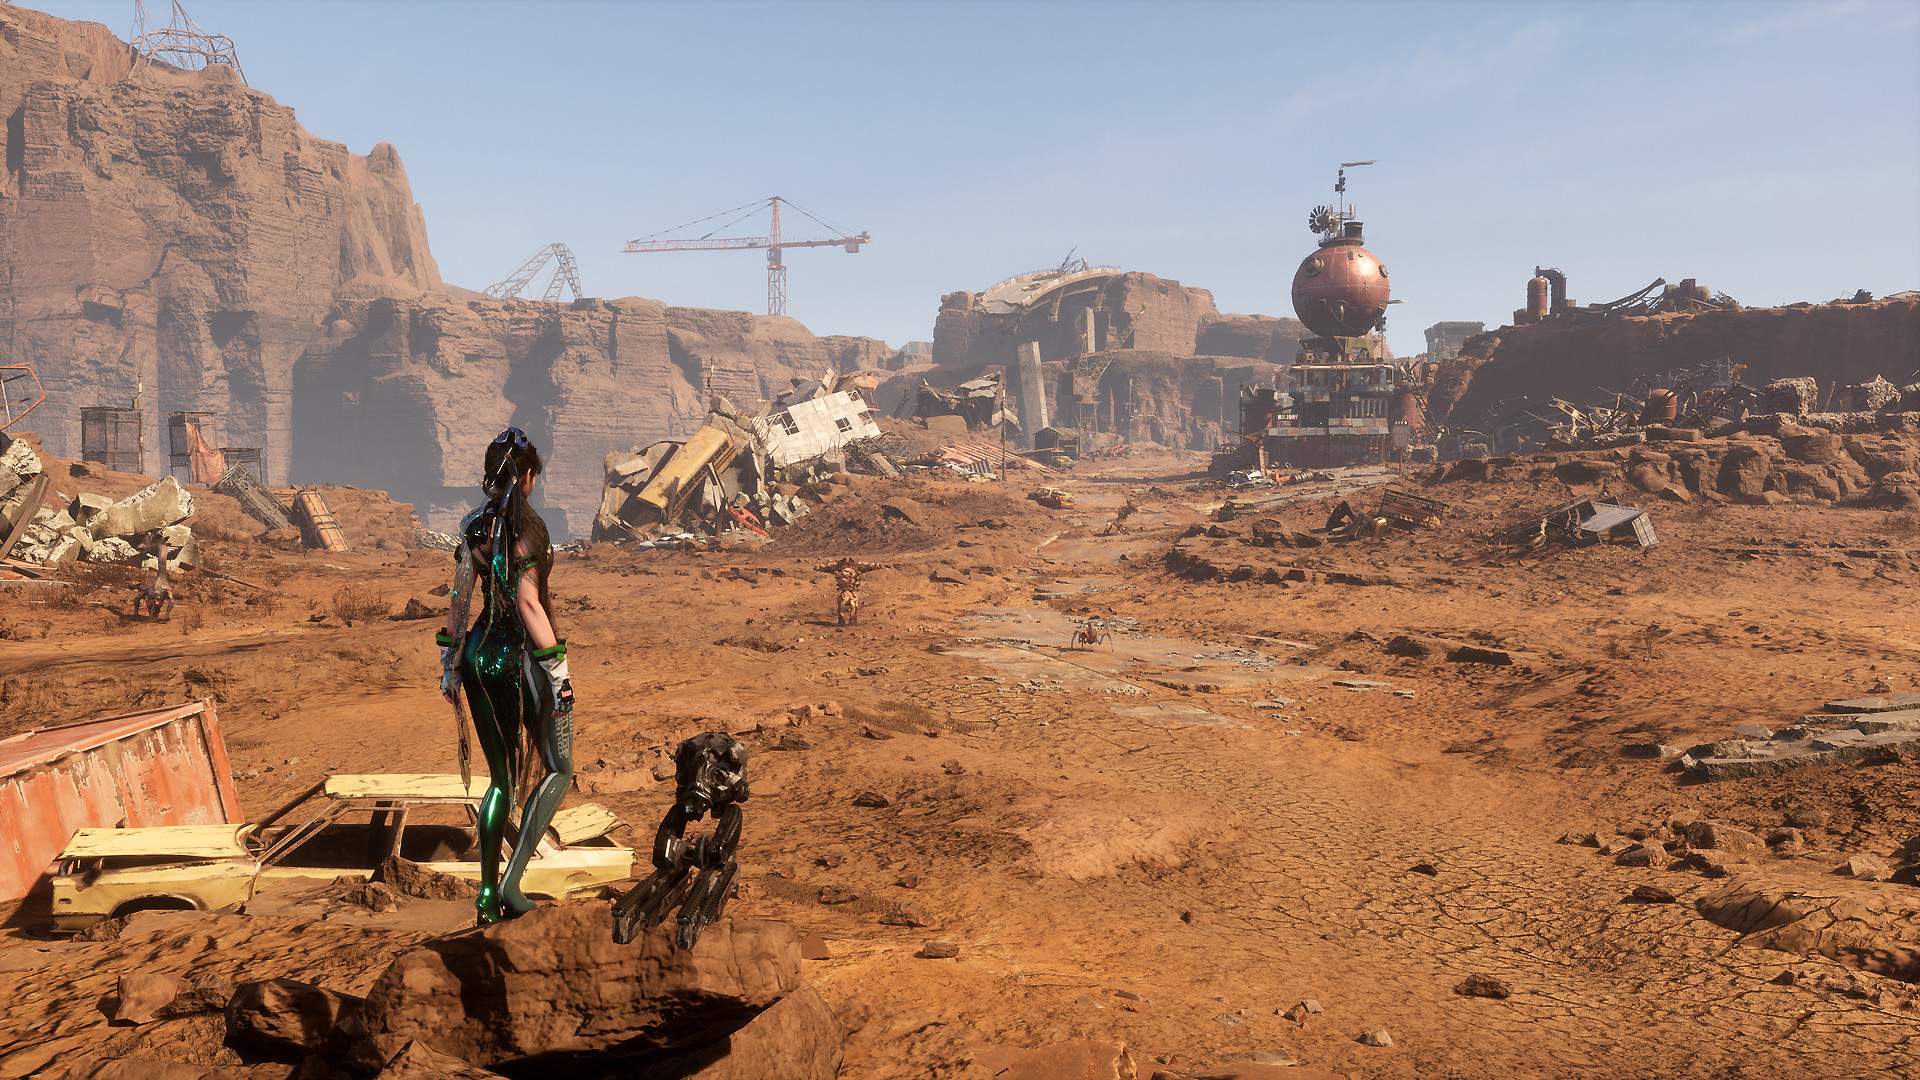 Eve stares out onto a wasteland, littered with destroyed vehicles and containers. Creatures skitter in the open area in front, while cranes can be spotted in the far distance.